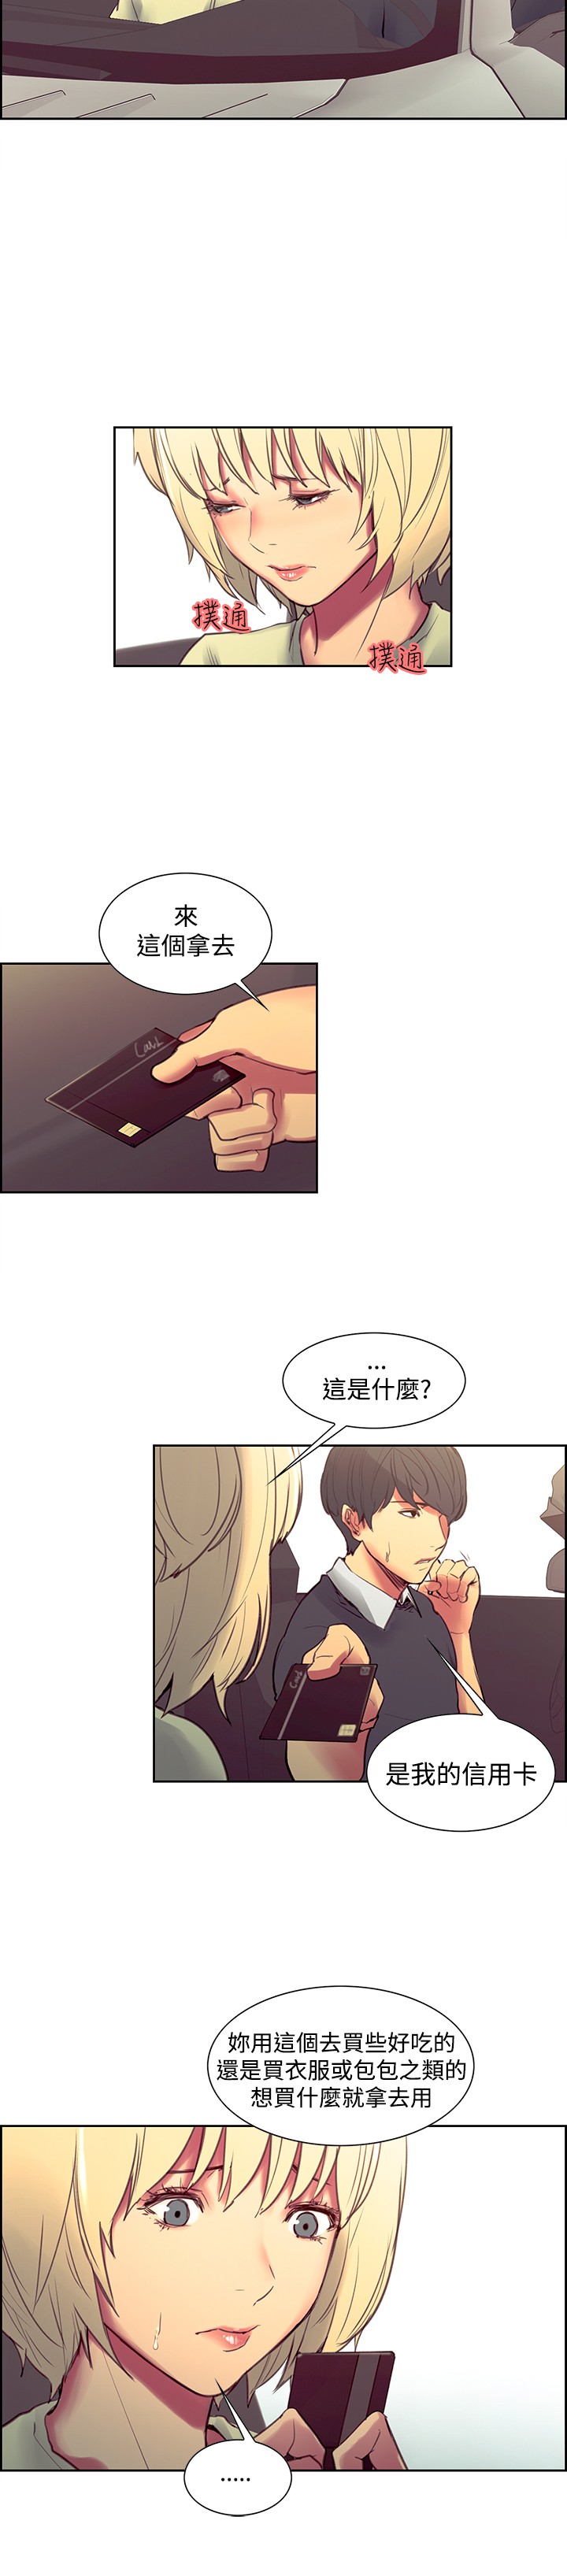 [Serious] Domesticate the Housekeeper 调教家政妇 Ch.29~41 [Chinese]中文 page 28 full